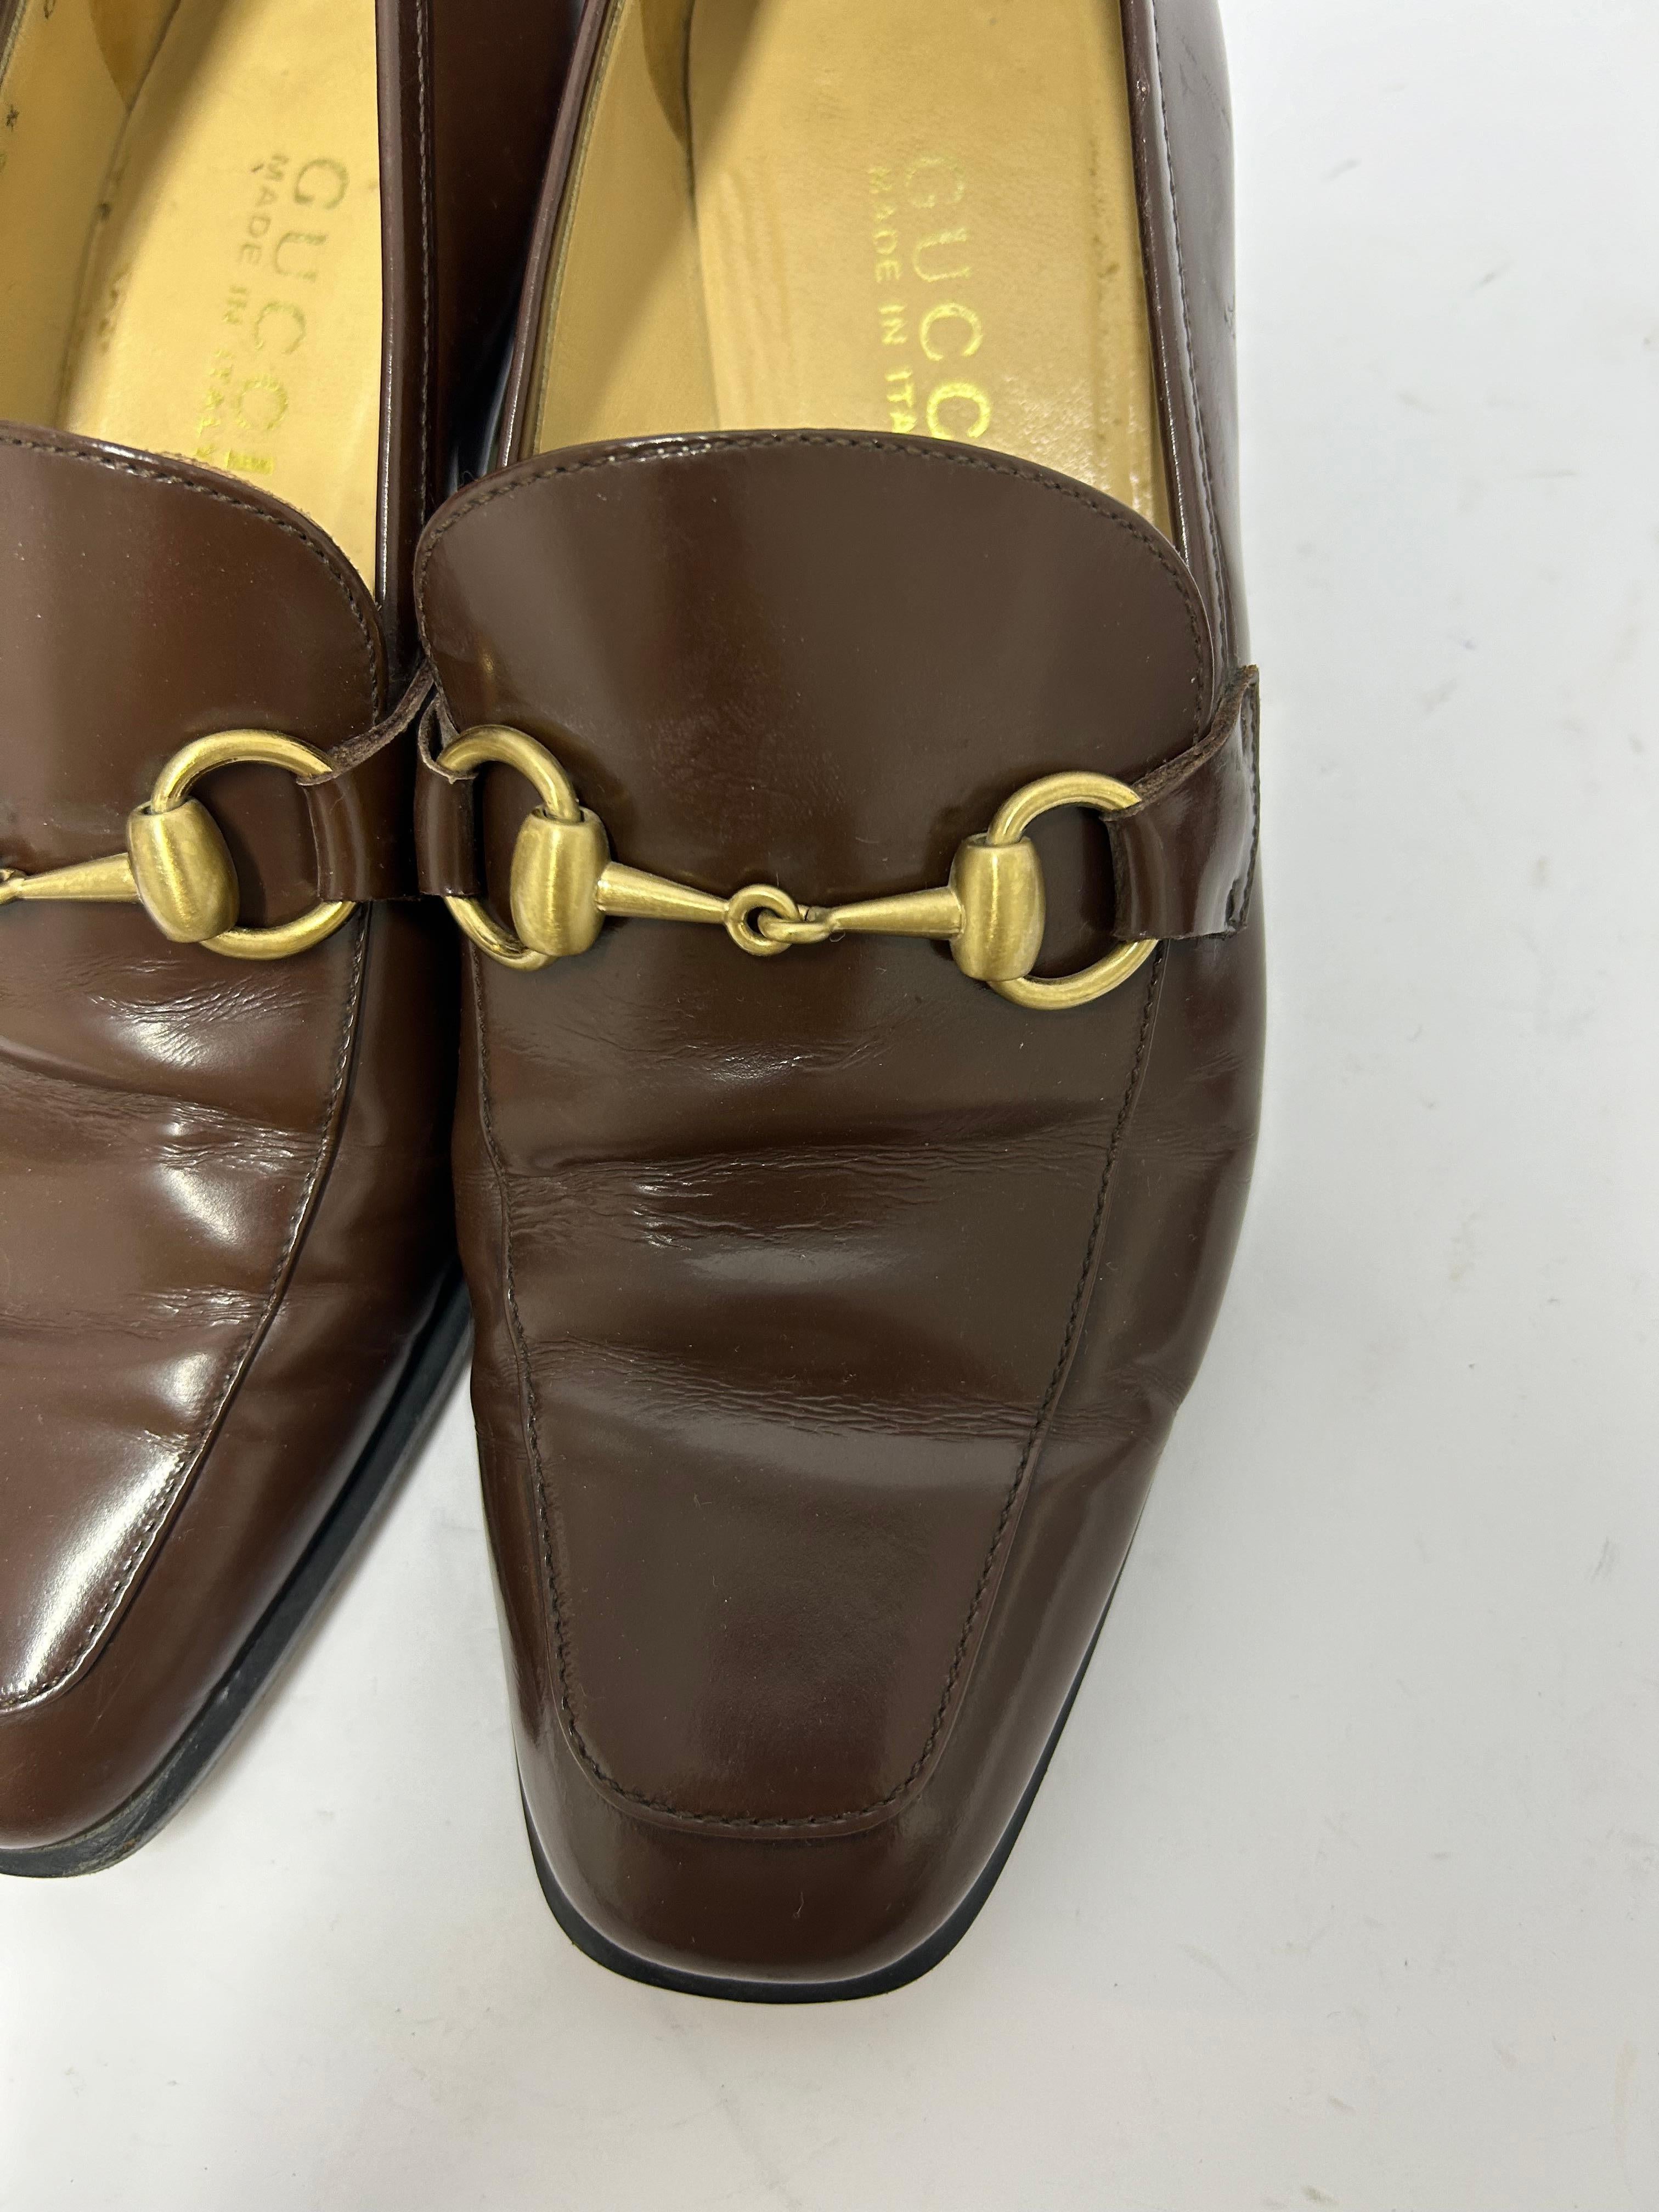 Gucci Horsebit Leather Loafers Size EU 36.5 For Sale 3